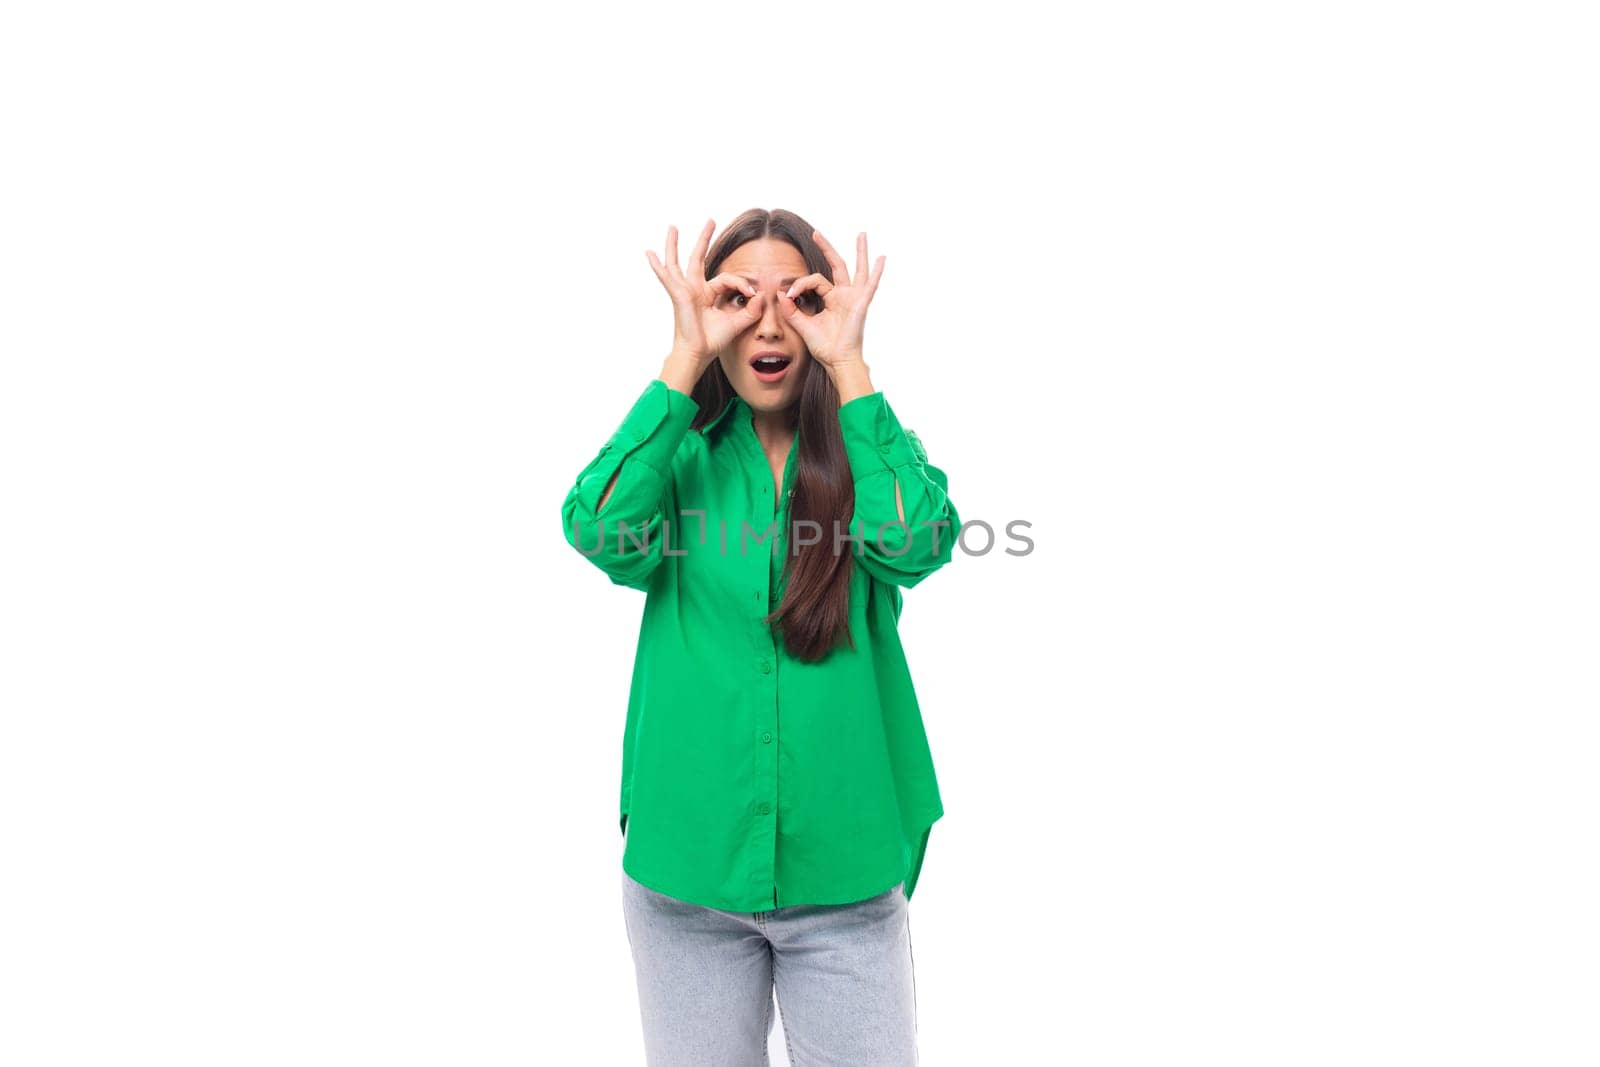 well-groomed slender brunette woman with long hair dressed in a casual green shirt makes faces by TRMK